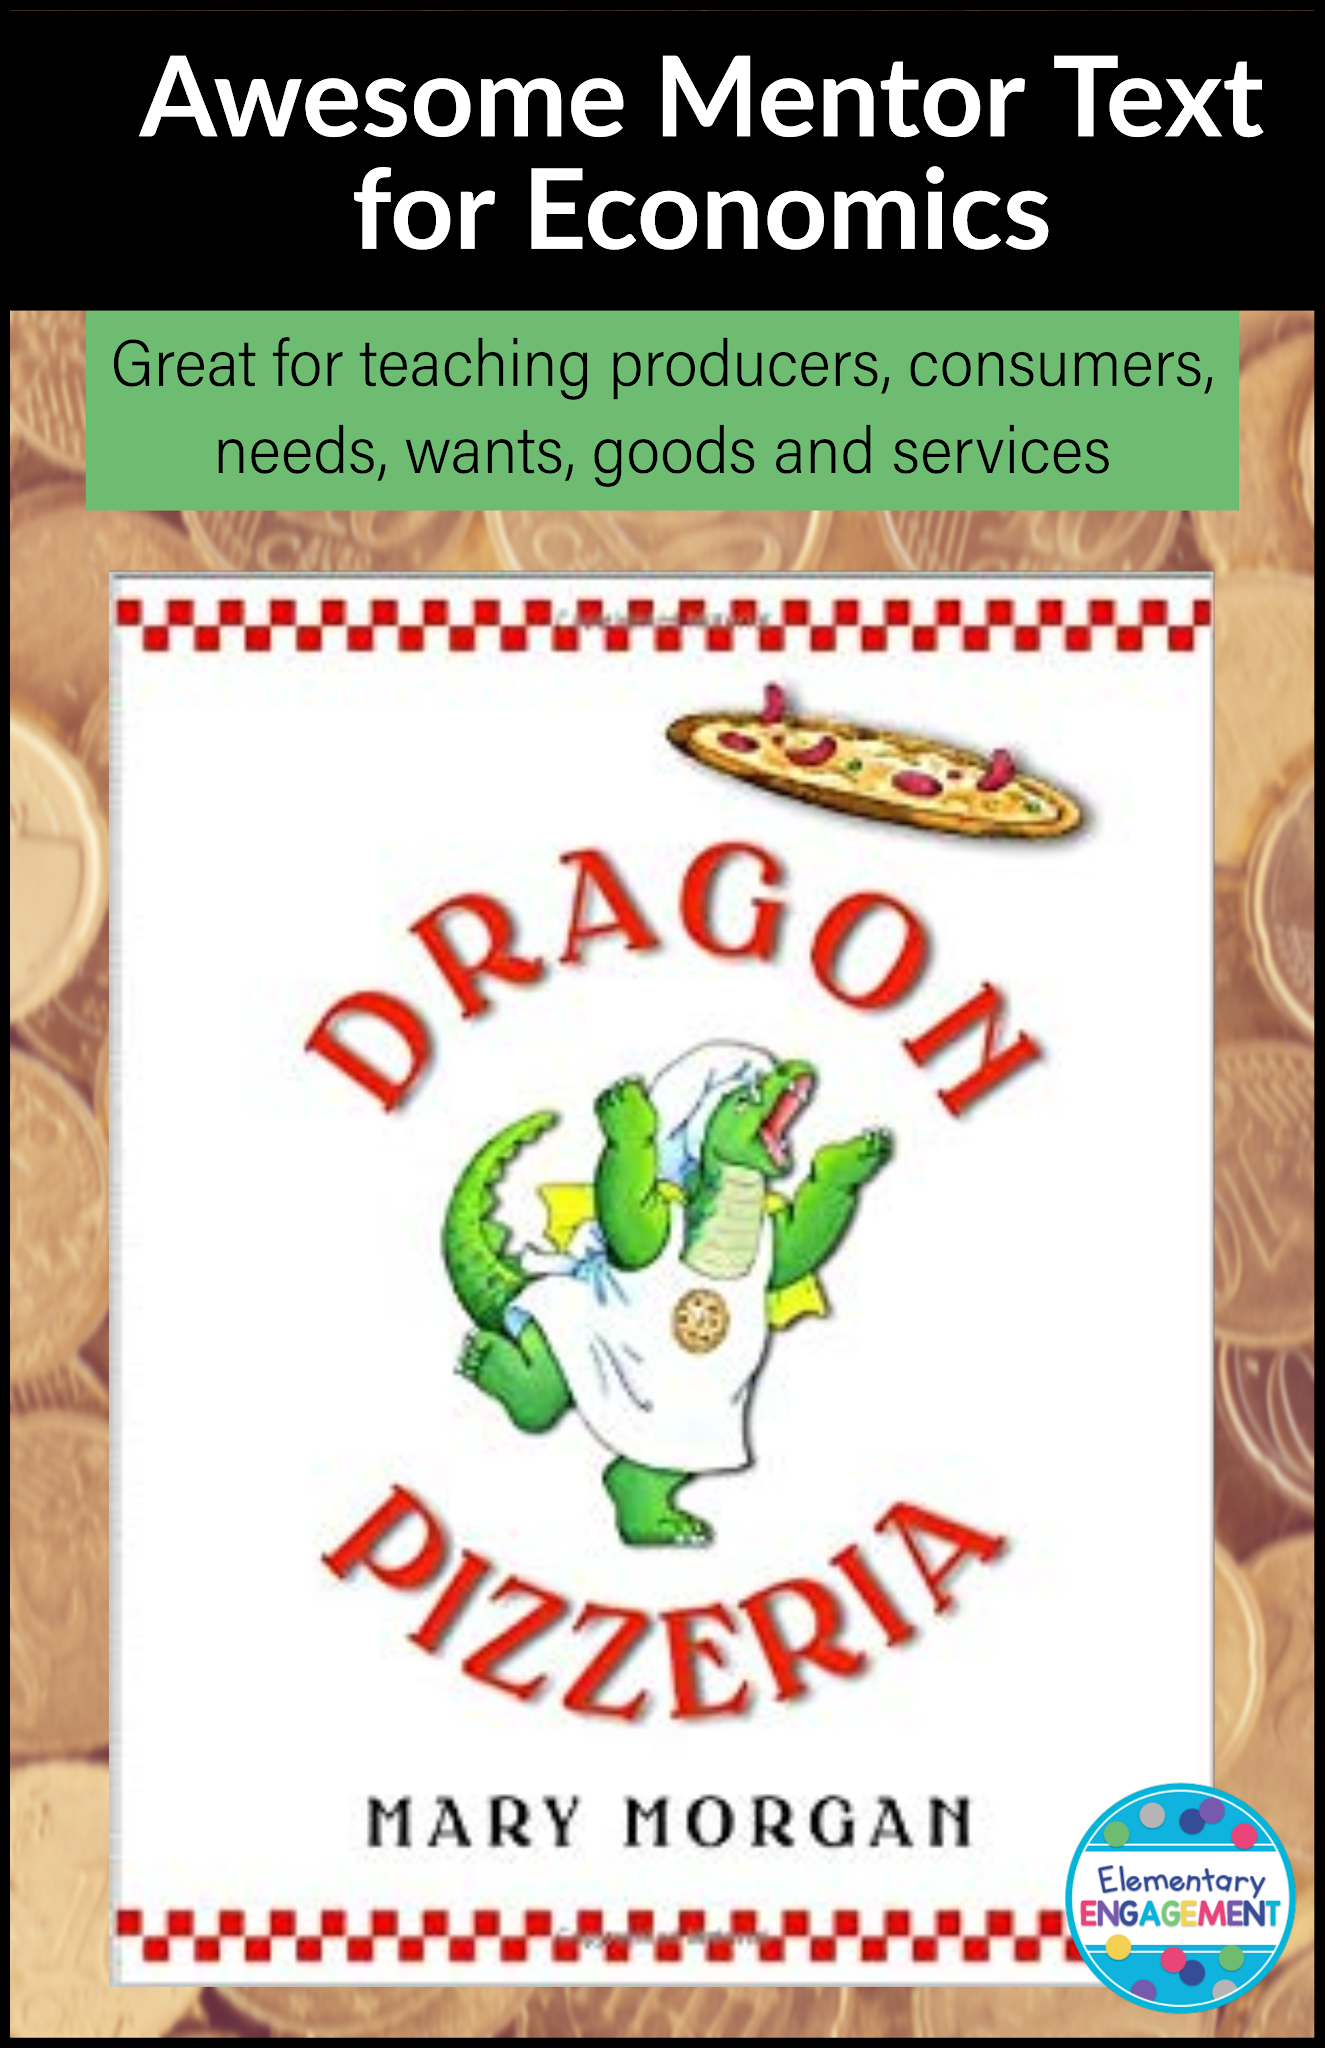 A fantastic mentor text for economics - Dragons are producers, and fairy tale characters are the consumers.  They order some interesting pizzas!